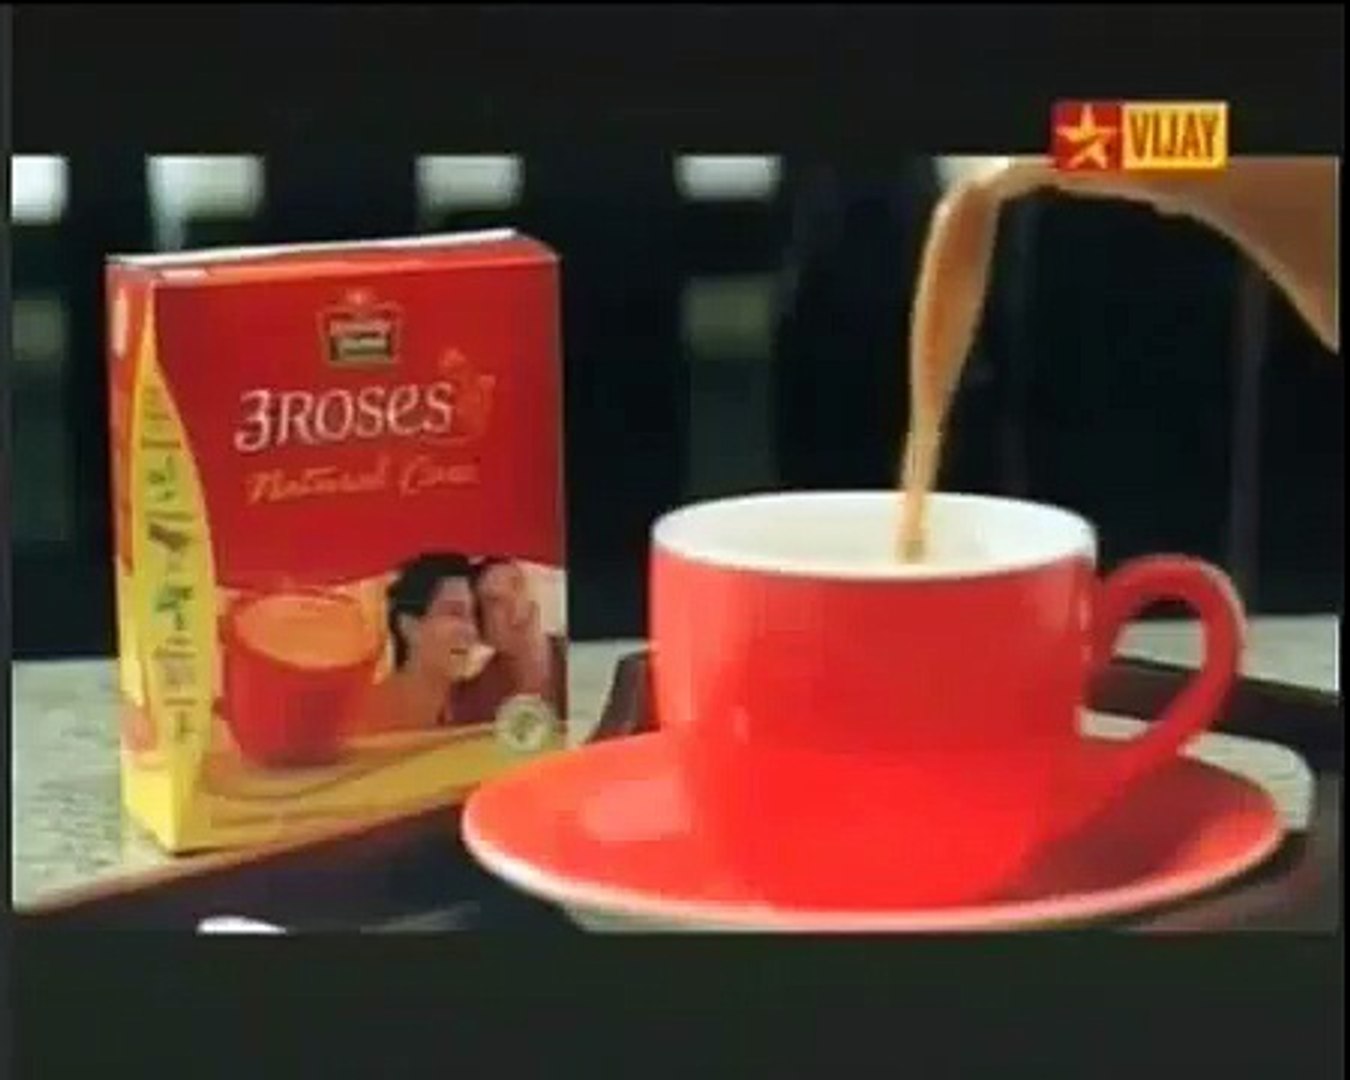 Brookebond 3roses Tea South Indian Tamil Advertisement Video Dailymotion